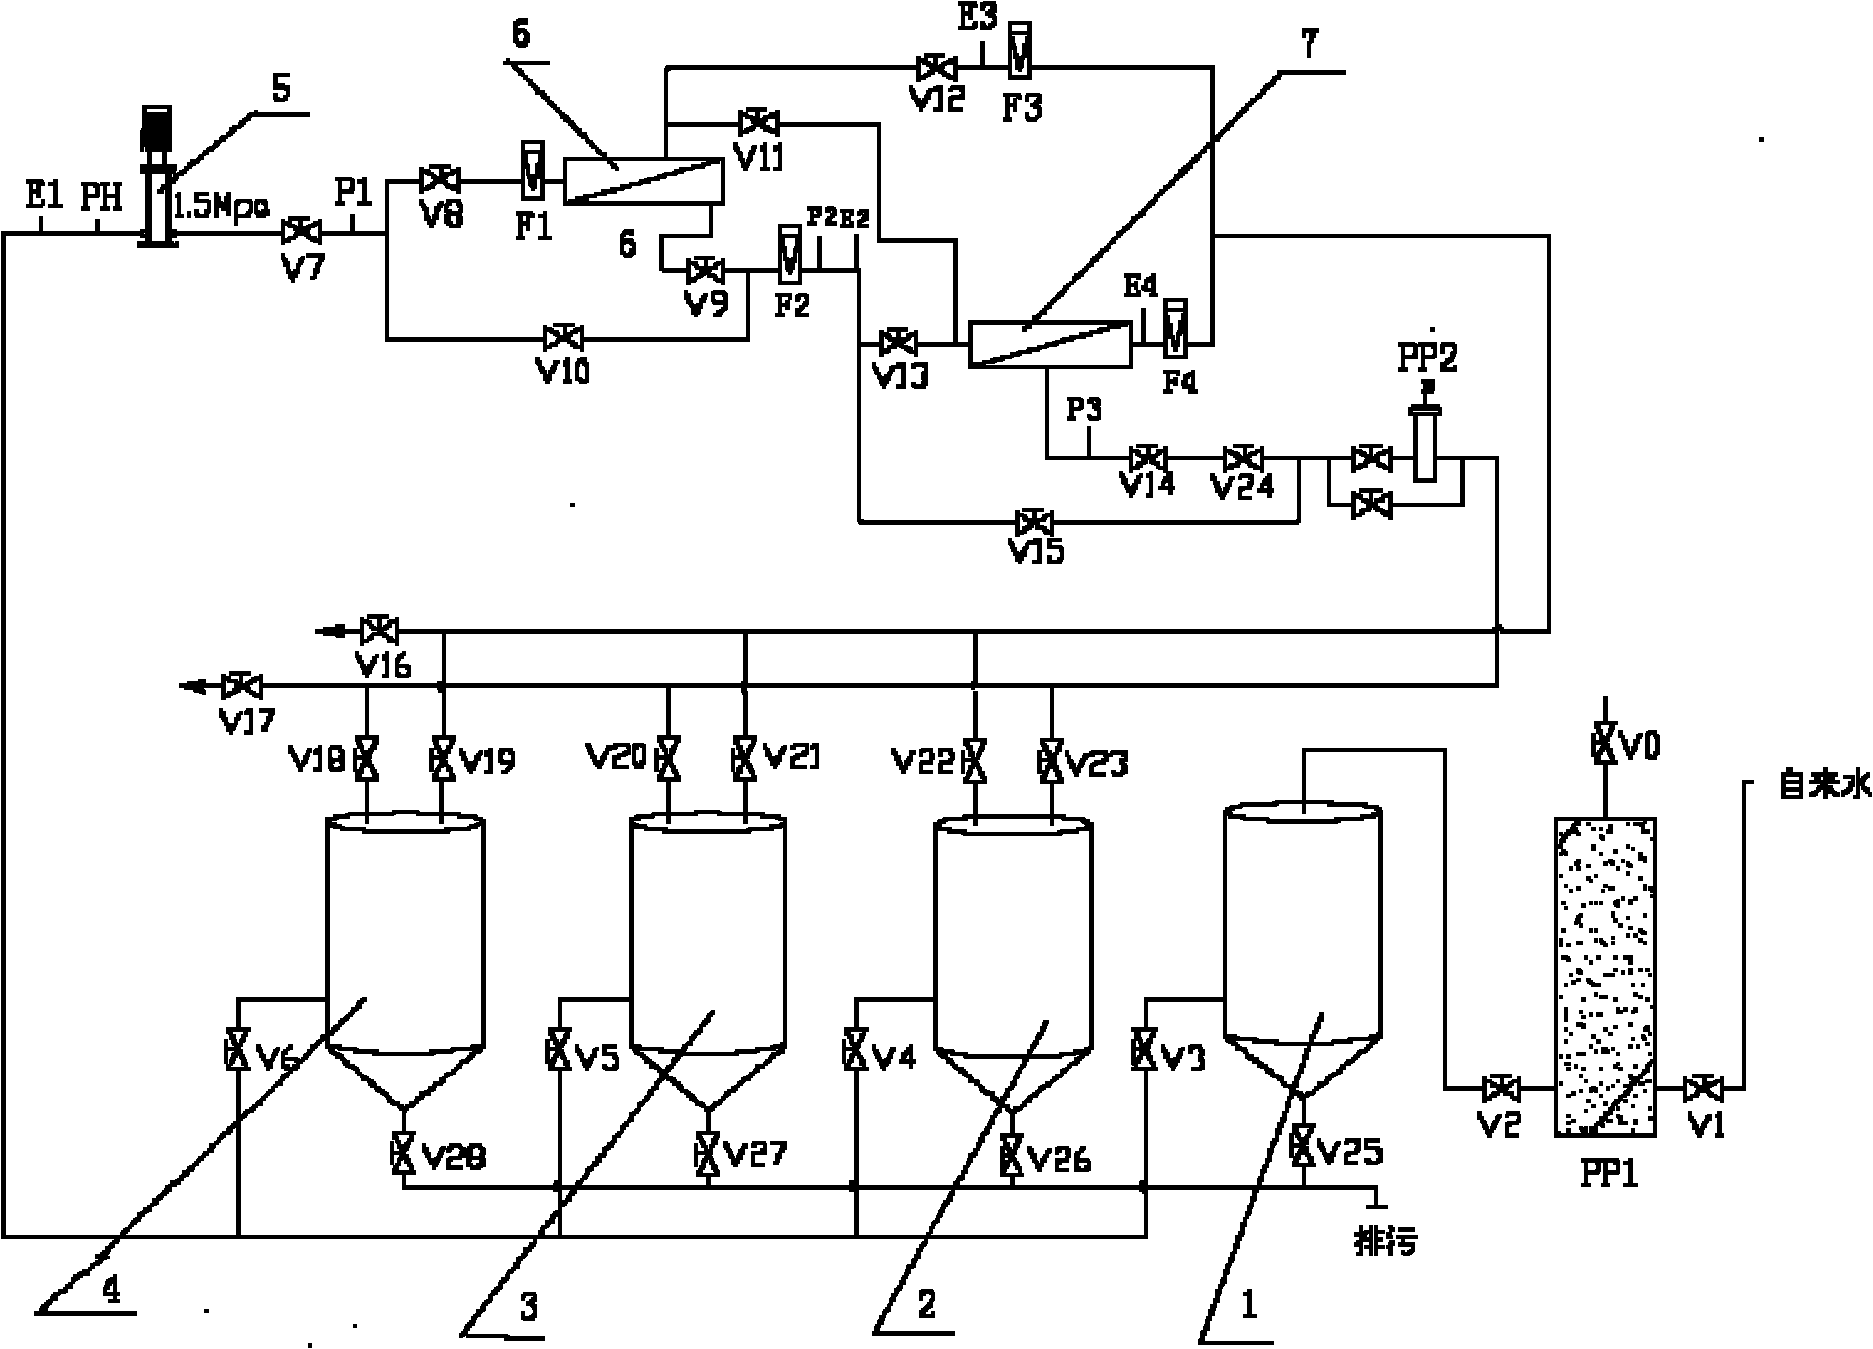 Off-line washing and repairing device for multifunctional waste reverse osmosis membrane